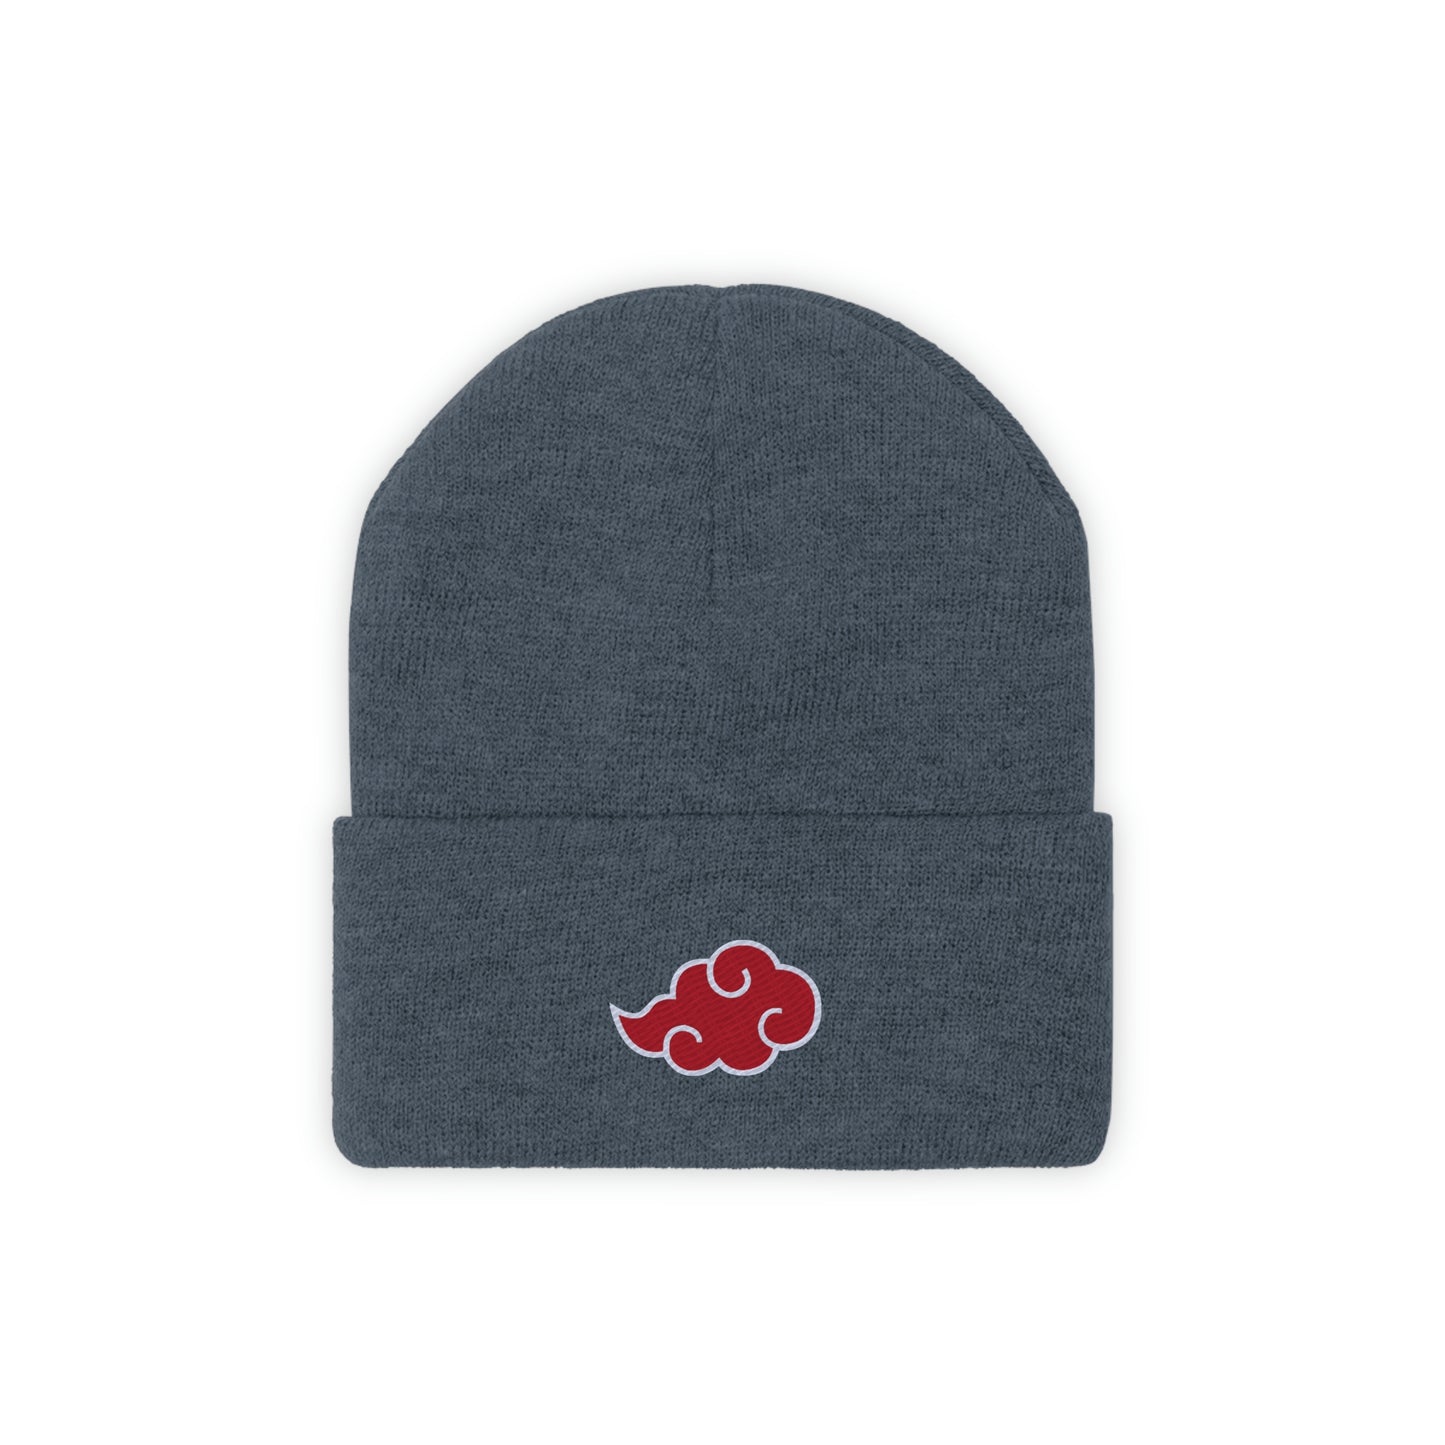 Anime Cloud Embroidered Beanie red white